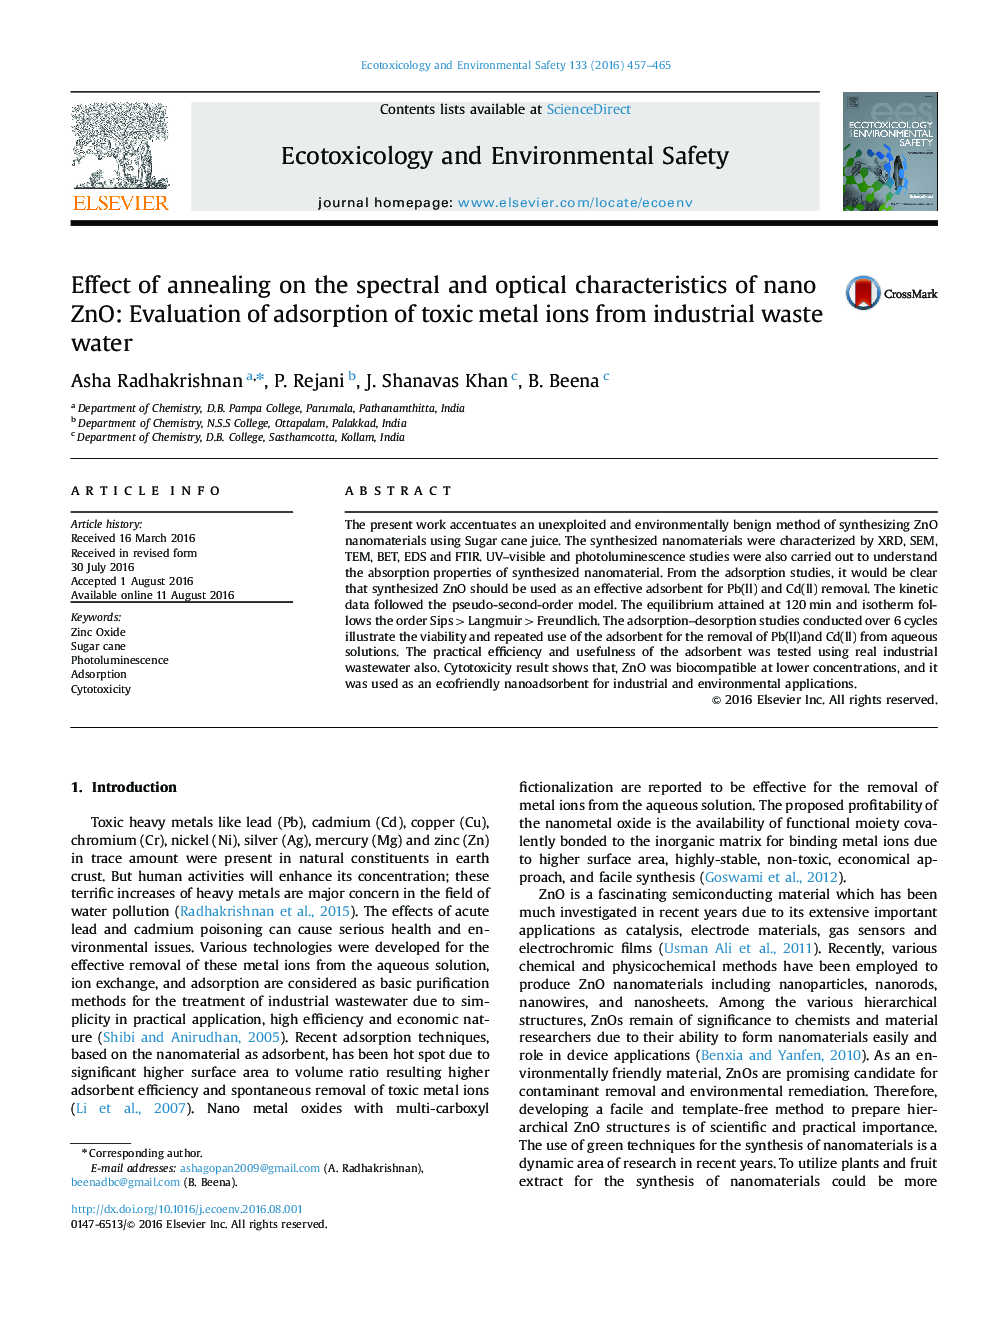 Effect of annealing on the spectral and optical characteristics of nano ZnO: Evaluation of adsorption of toxic metal ions from industrial waste water